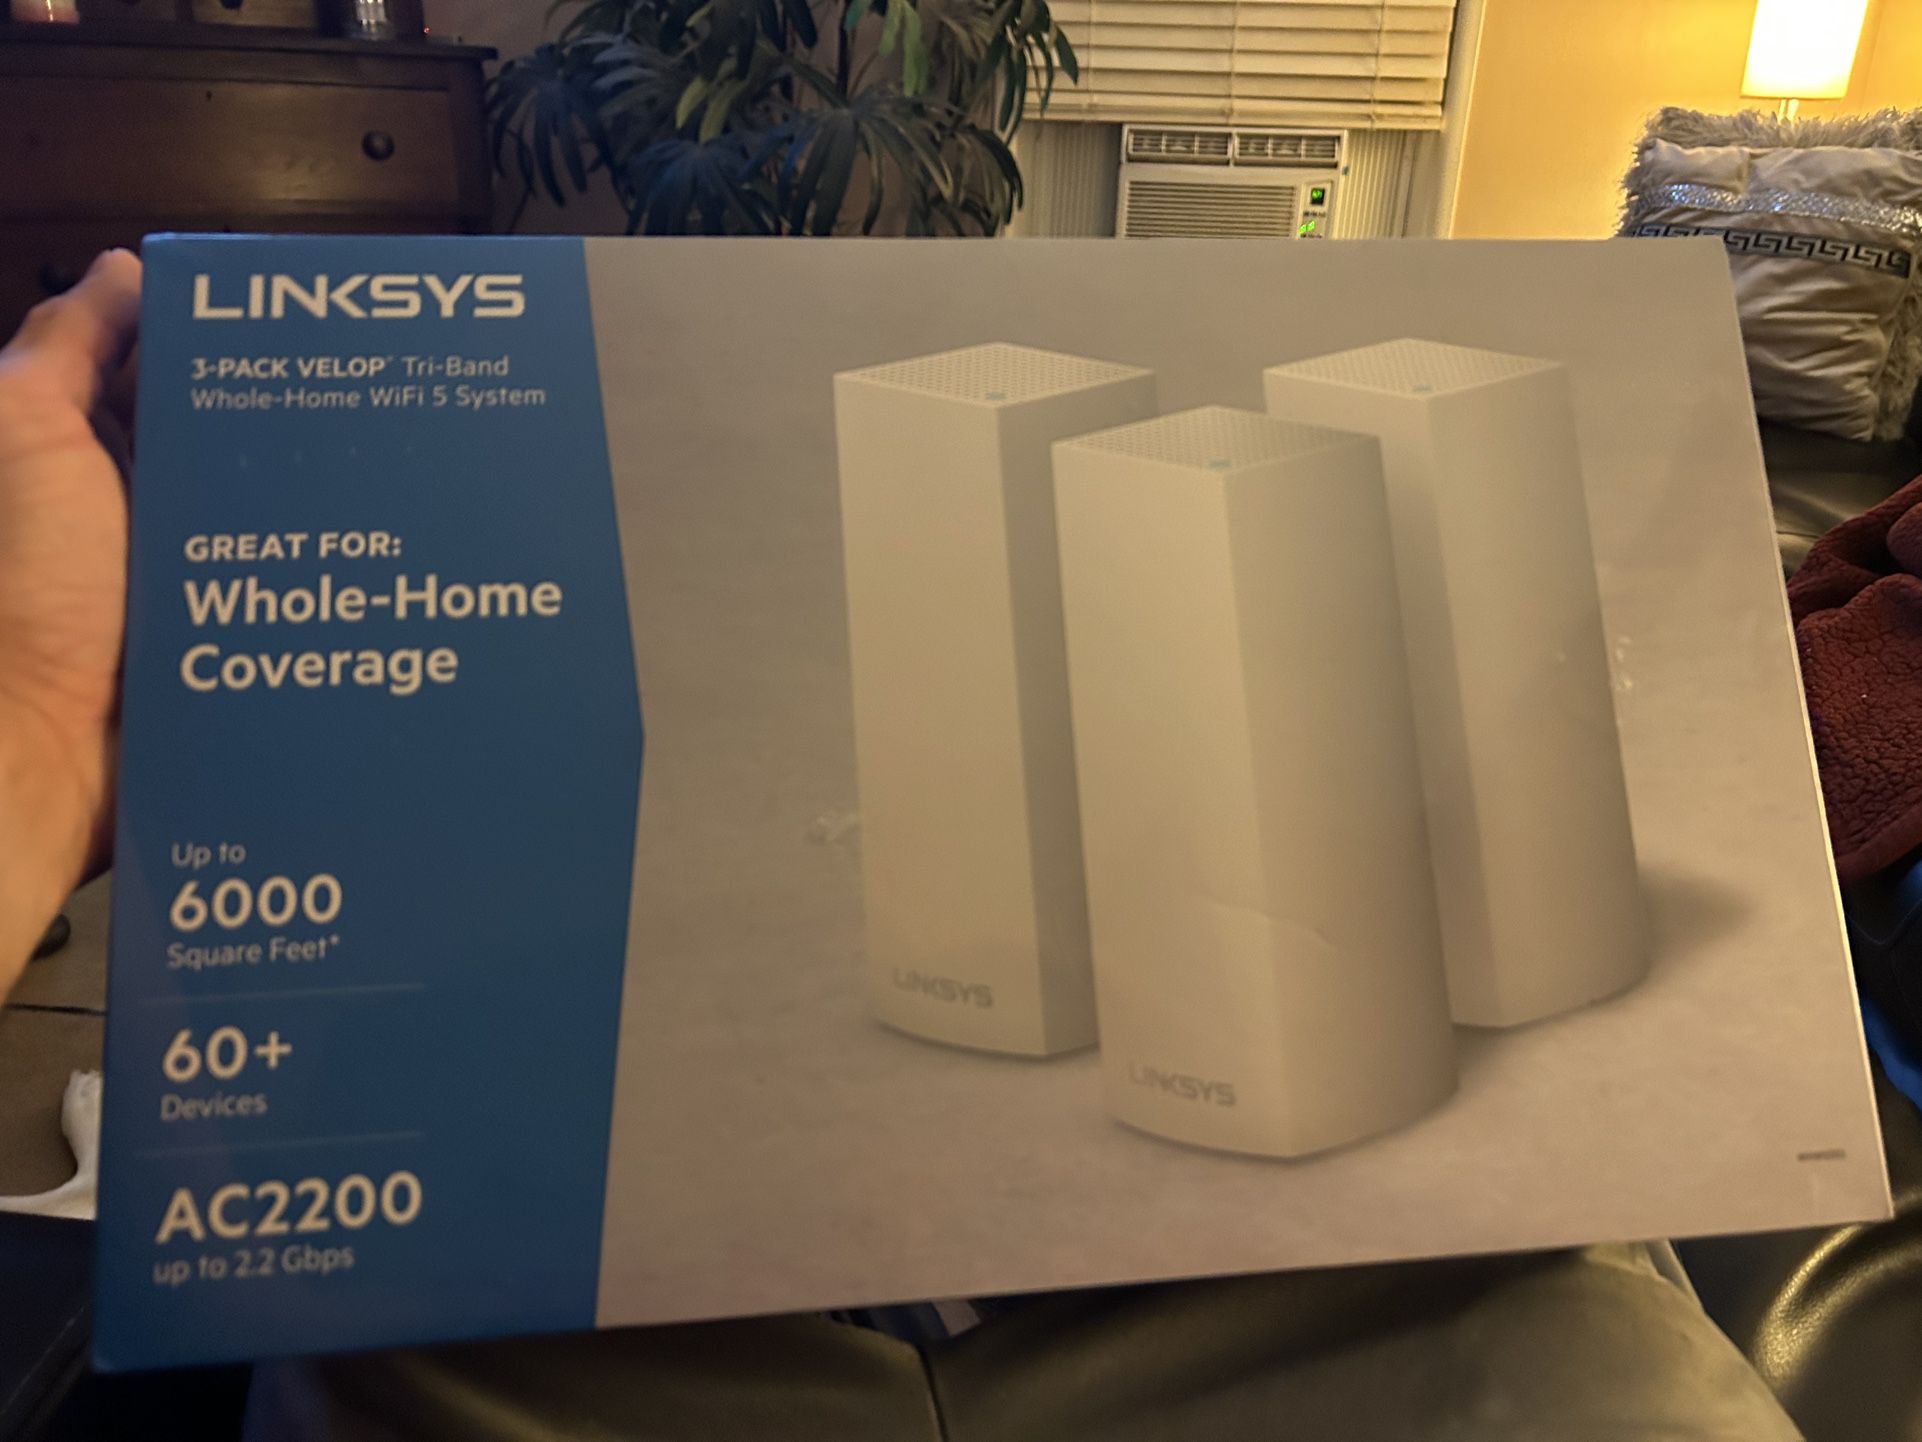 Linksys 3 Pack Velop